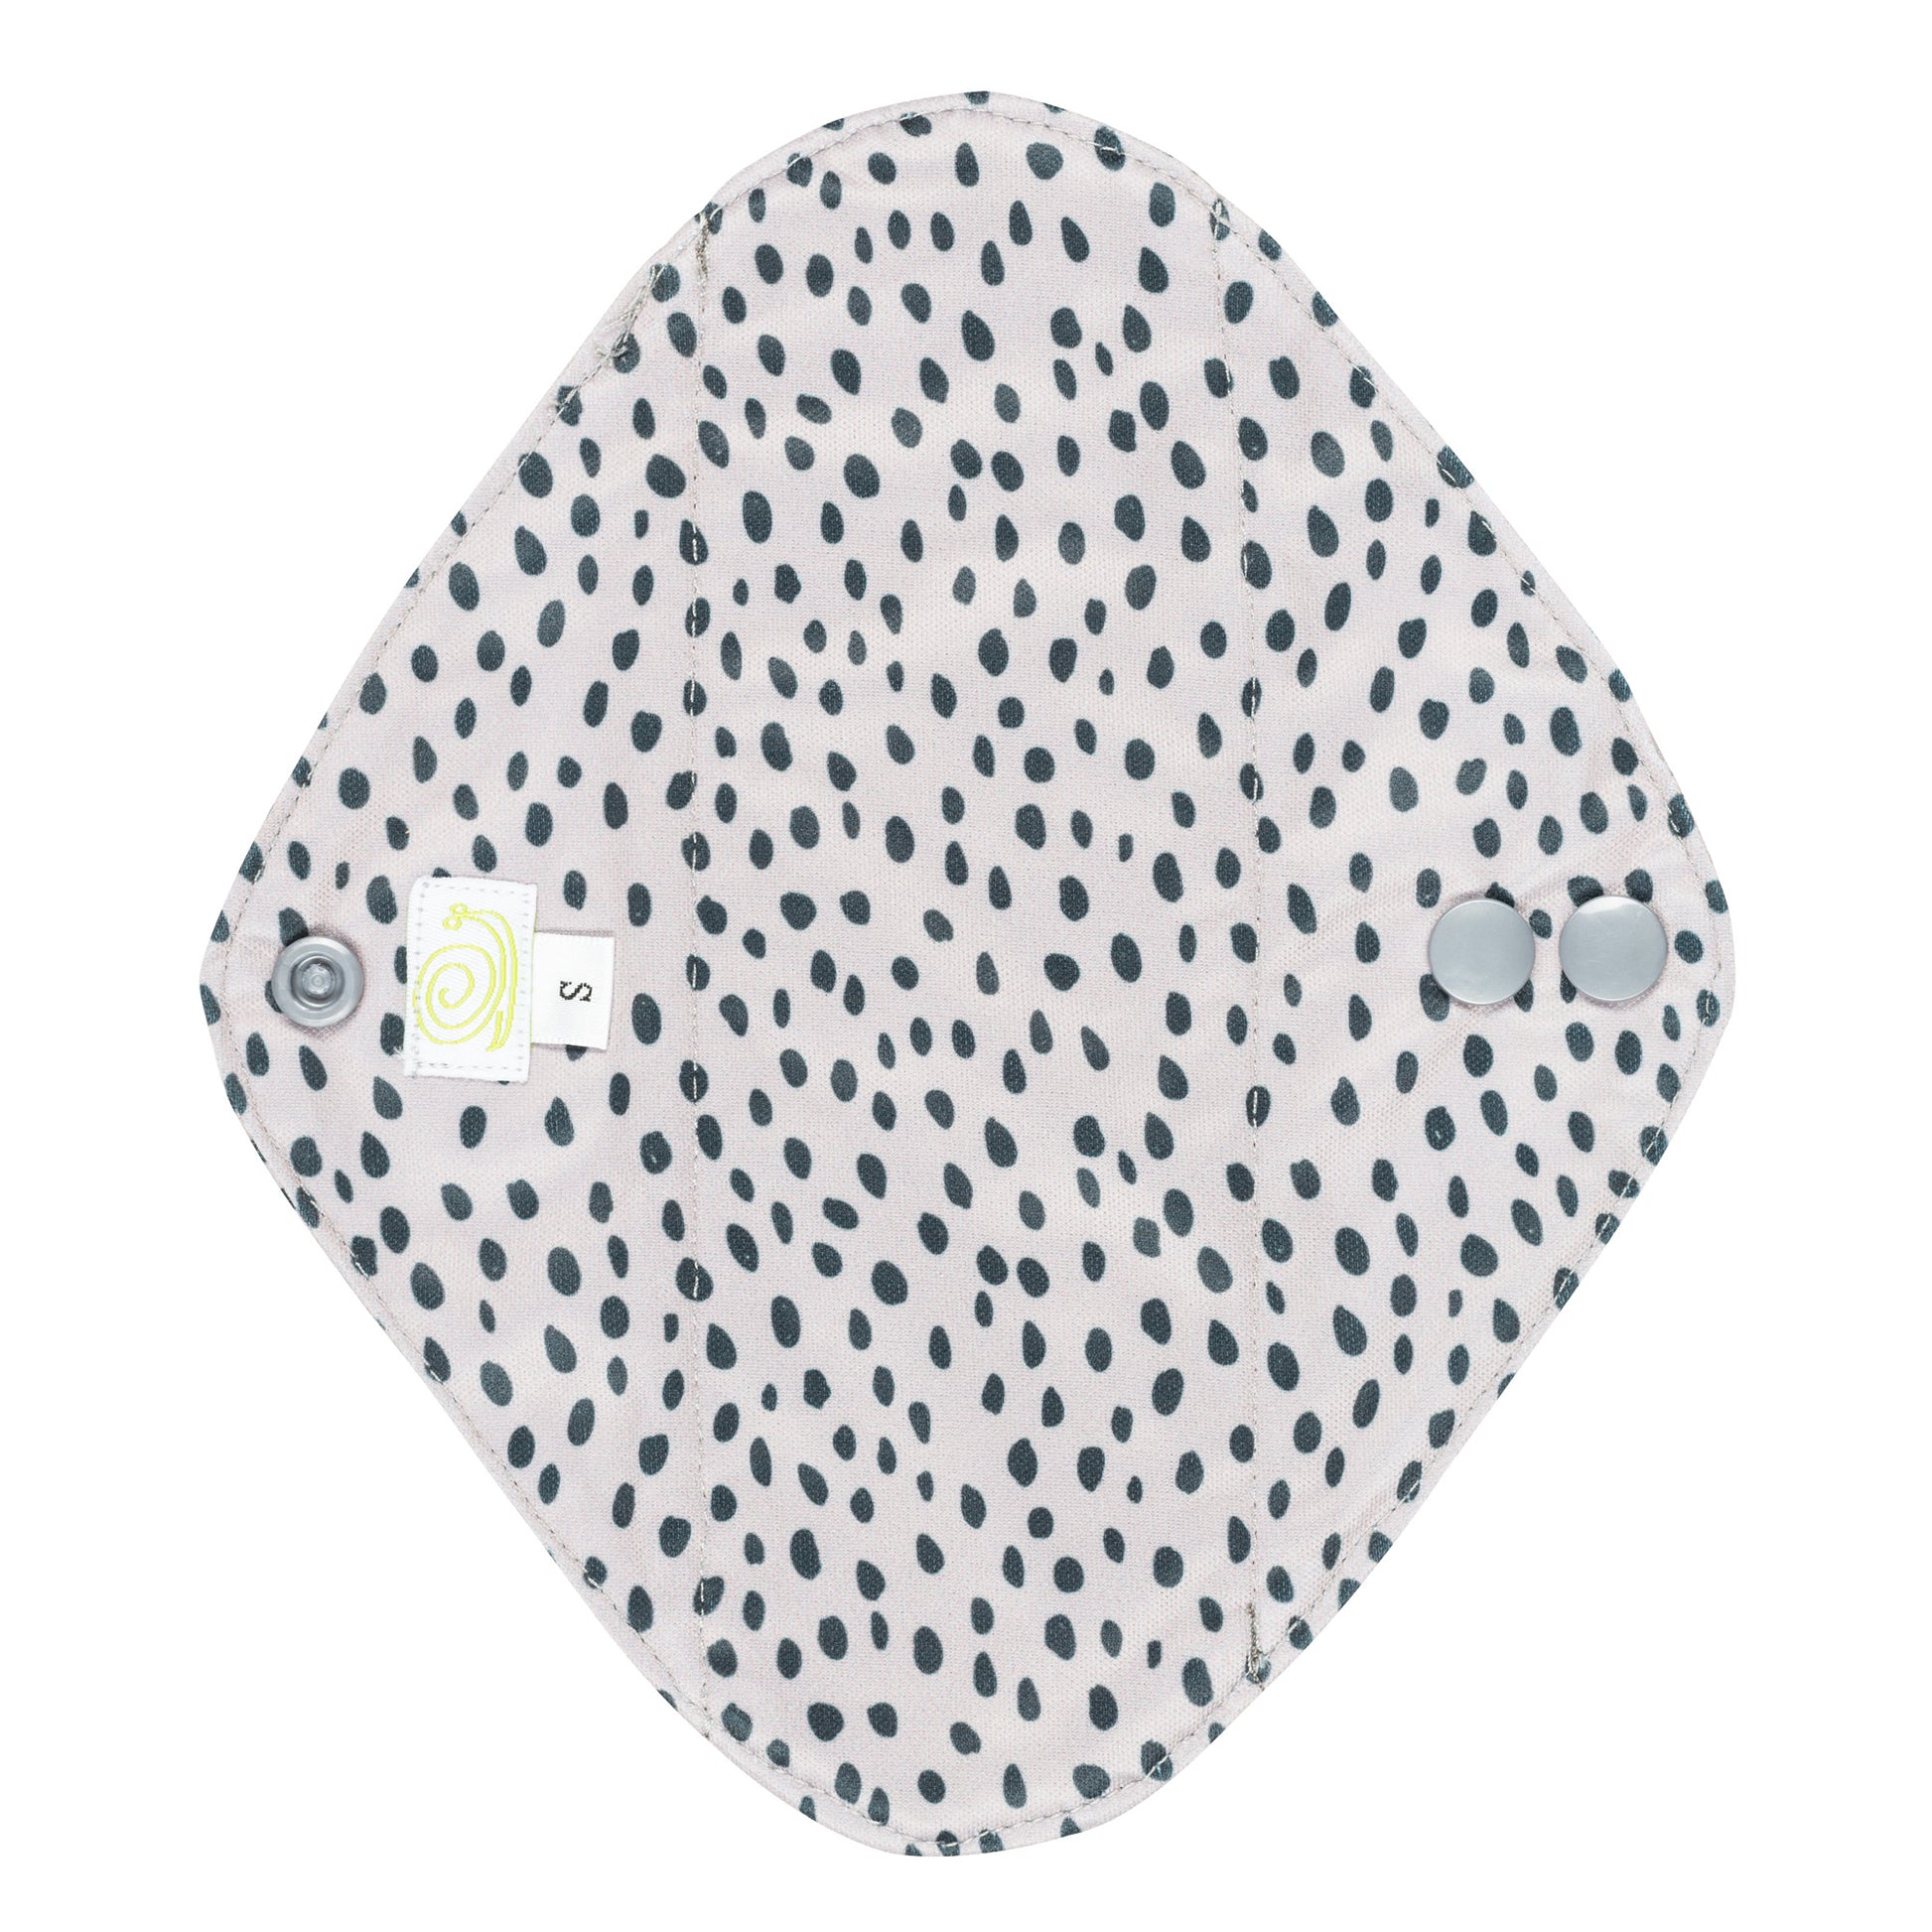 Reusable Sanitary Pad with a white background and a black spotty design on it.